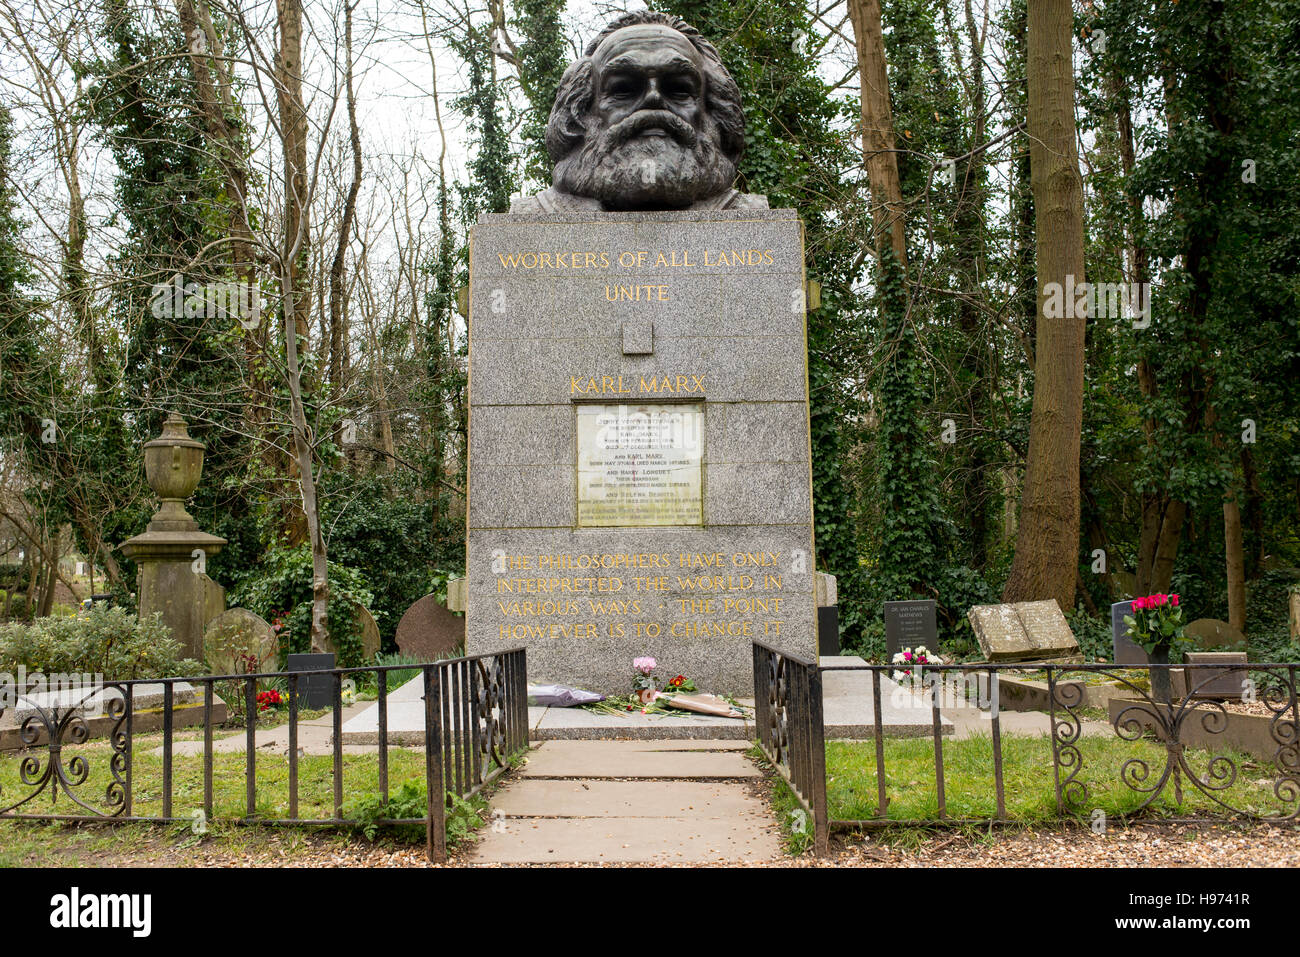 Tomb and statue of socialist philosopher and economist Karl Marx, located in the famous Highgate Cemetery in north London Stock Photo